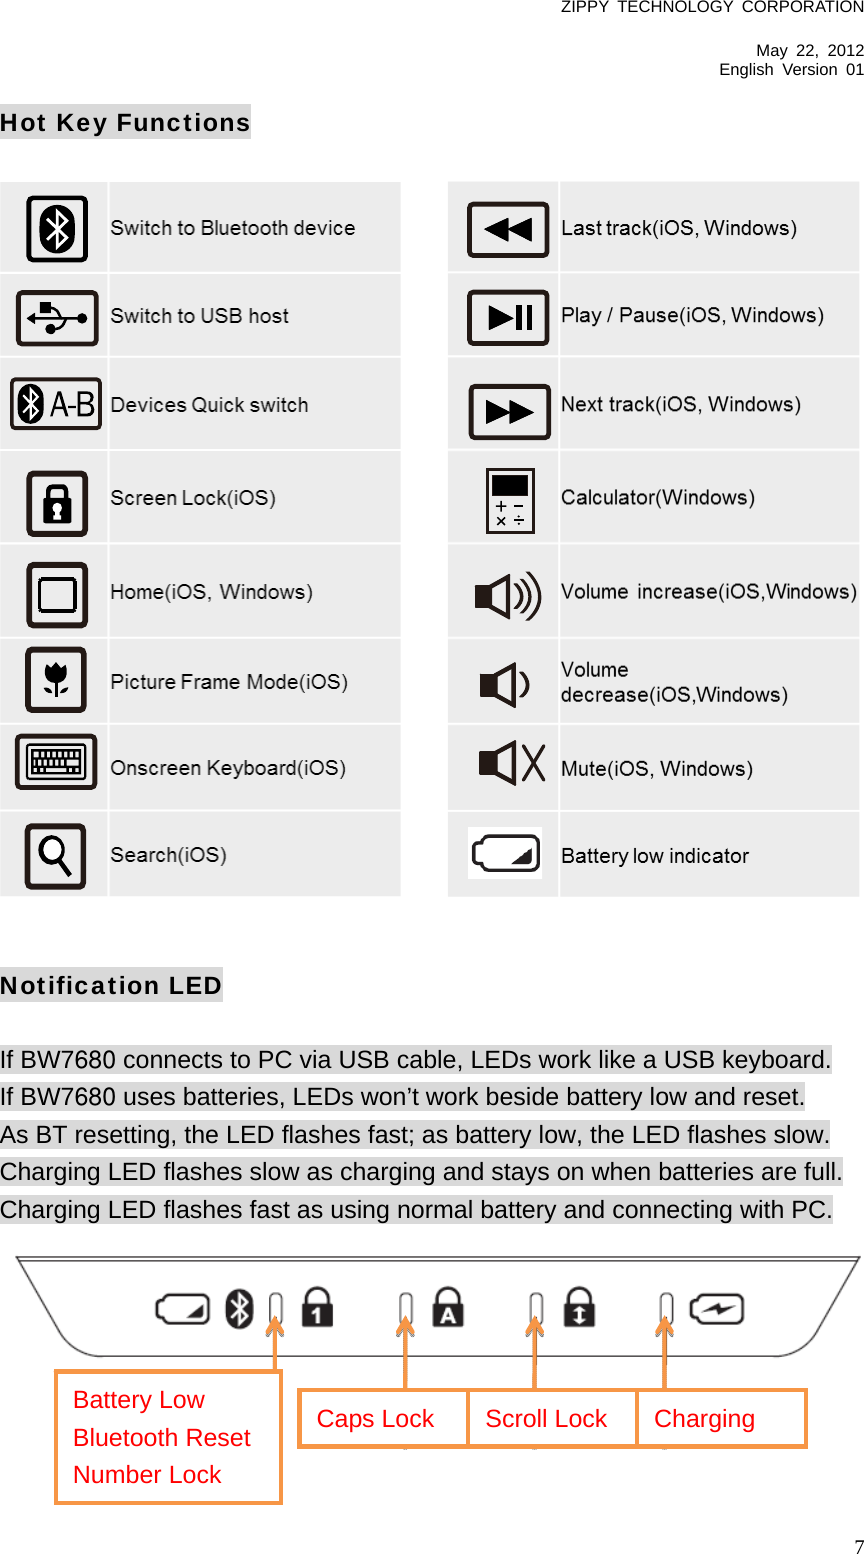 ZIPPY TECHNOLOGY CORPORATION  May 22, 2012 English Version 01   7Hot Key Functions                       Notification LED  If BW7680 connects to PC via USB cable, LEDs work like a USB keyboard. If BW7680 uses batteries, LEDs won’t work beside battery low and reset. As BT resetting, the LED flashes fast; as battery low, the LED flashes slow. Charging LED flashes slow as charging and stays on when batteries are full. Charging LED flashes fast as using normal battery and connecting with PC.     Battery Low Bluetooth Reset Number Lock Caps Lock  Scroll Lock  Charging 